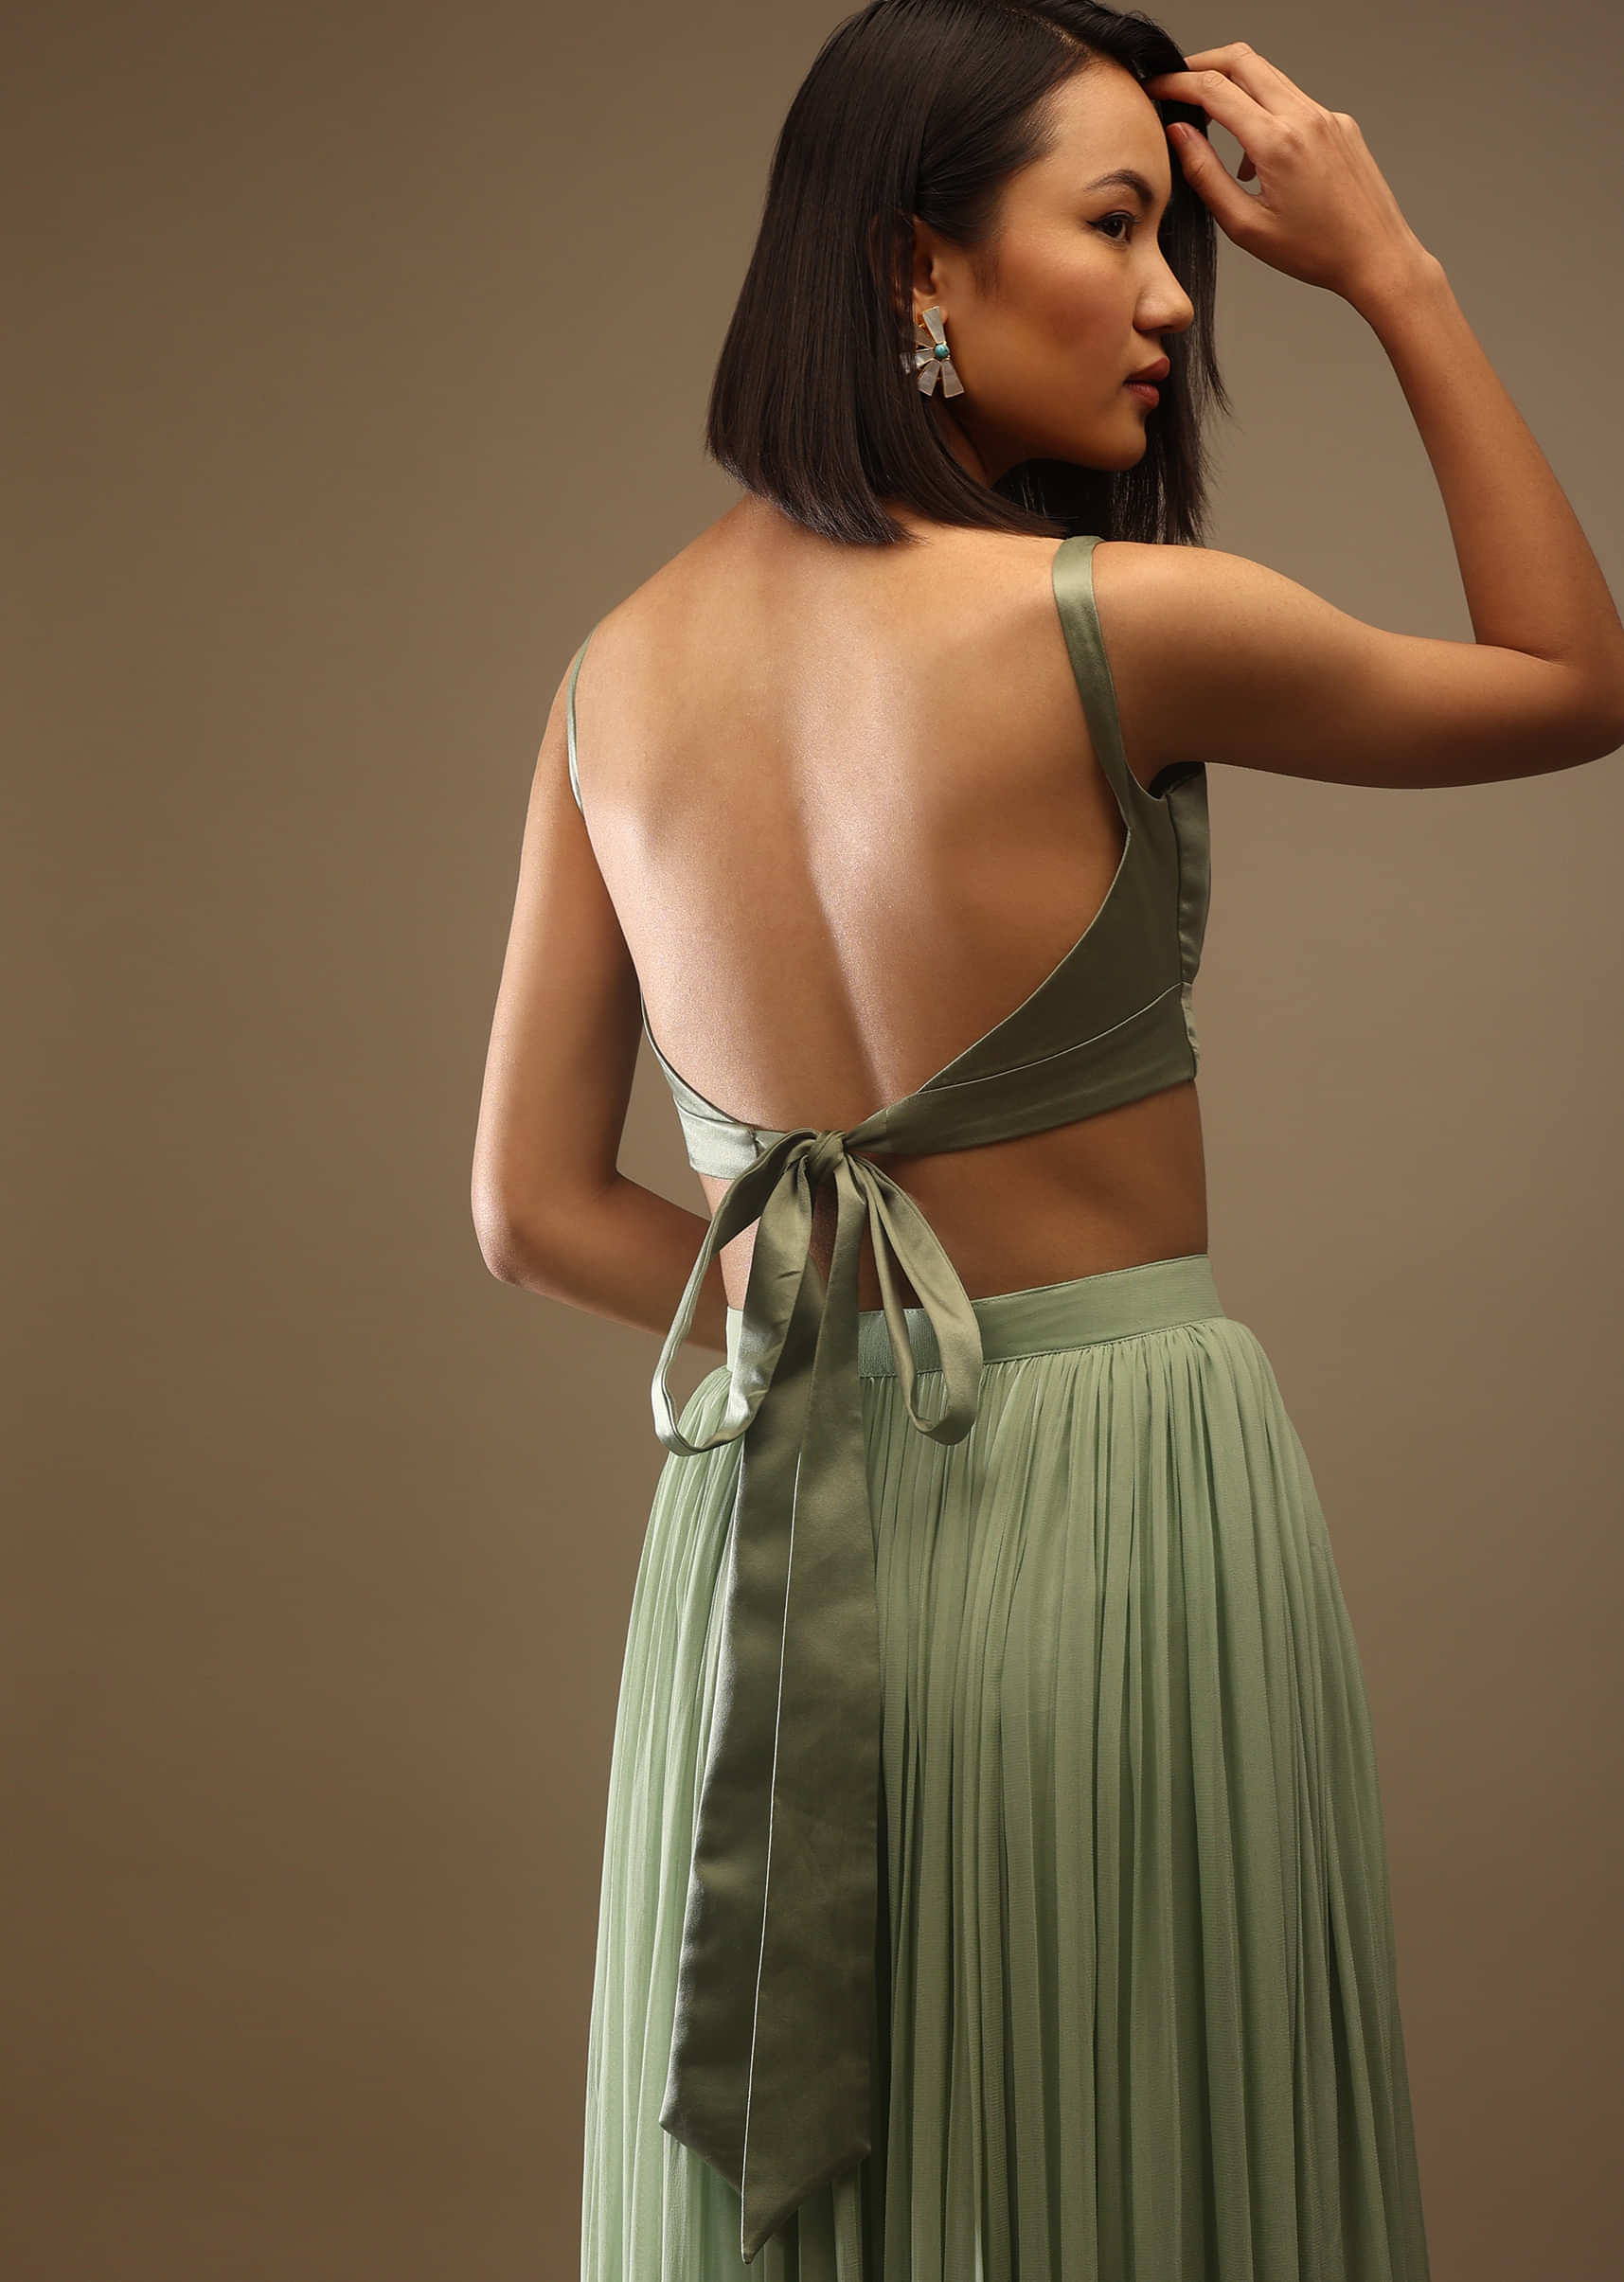 Seaspray Sleeveless Blouse With A Triangle Cut Out At The Bottom Back Tie-Up And Hooks Closure